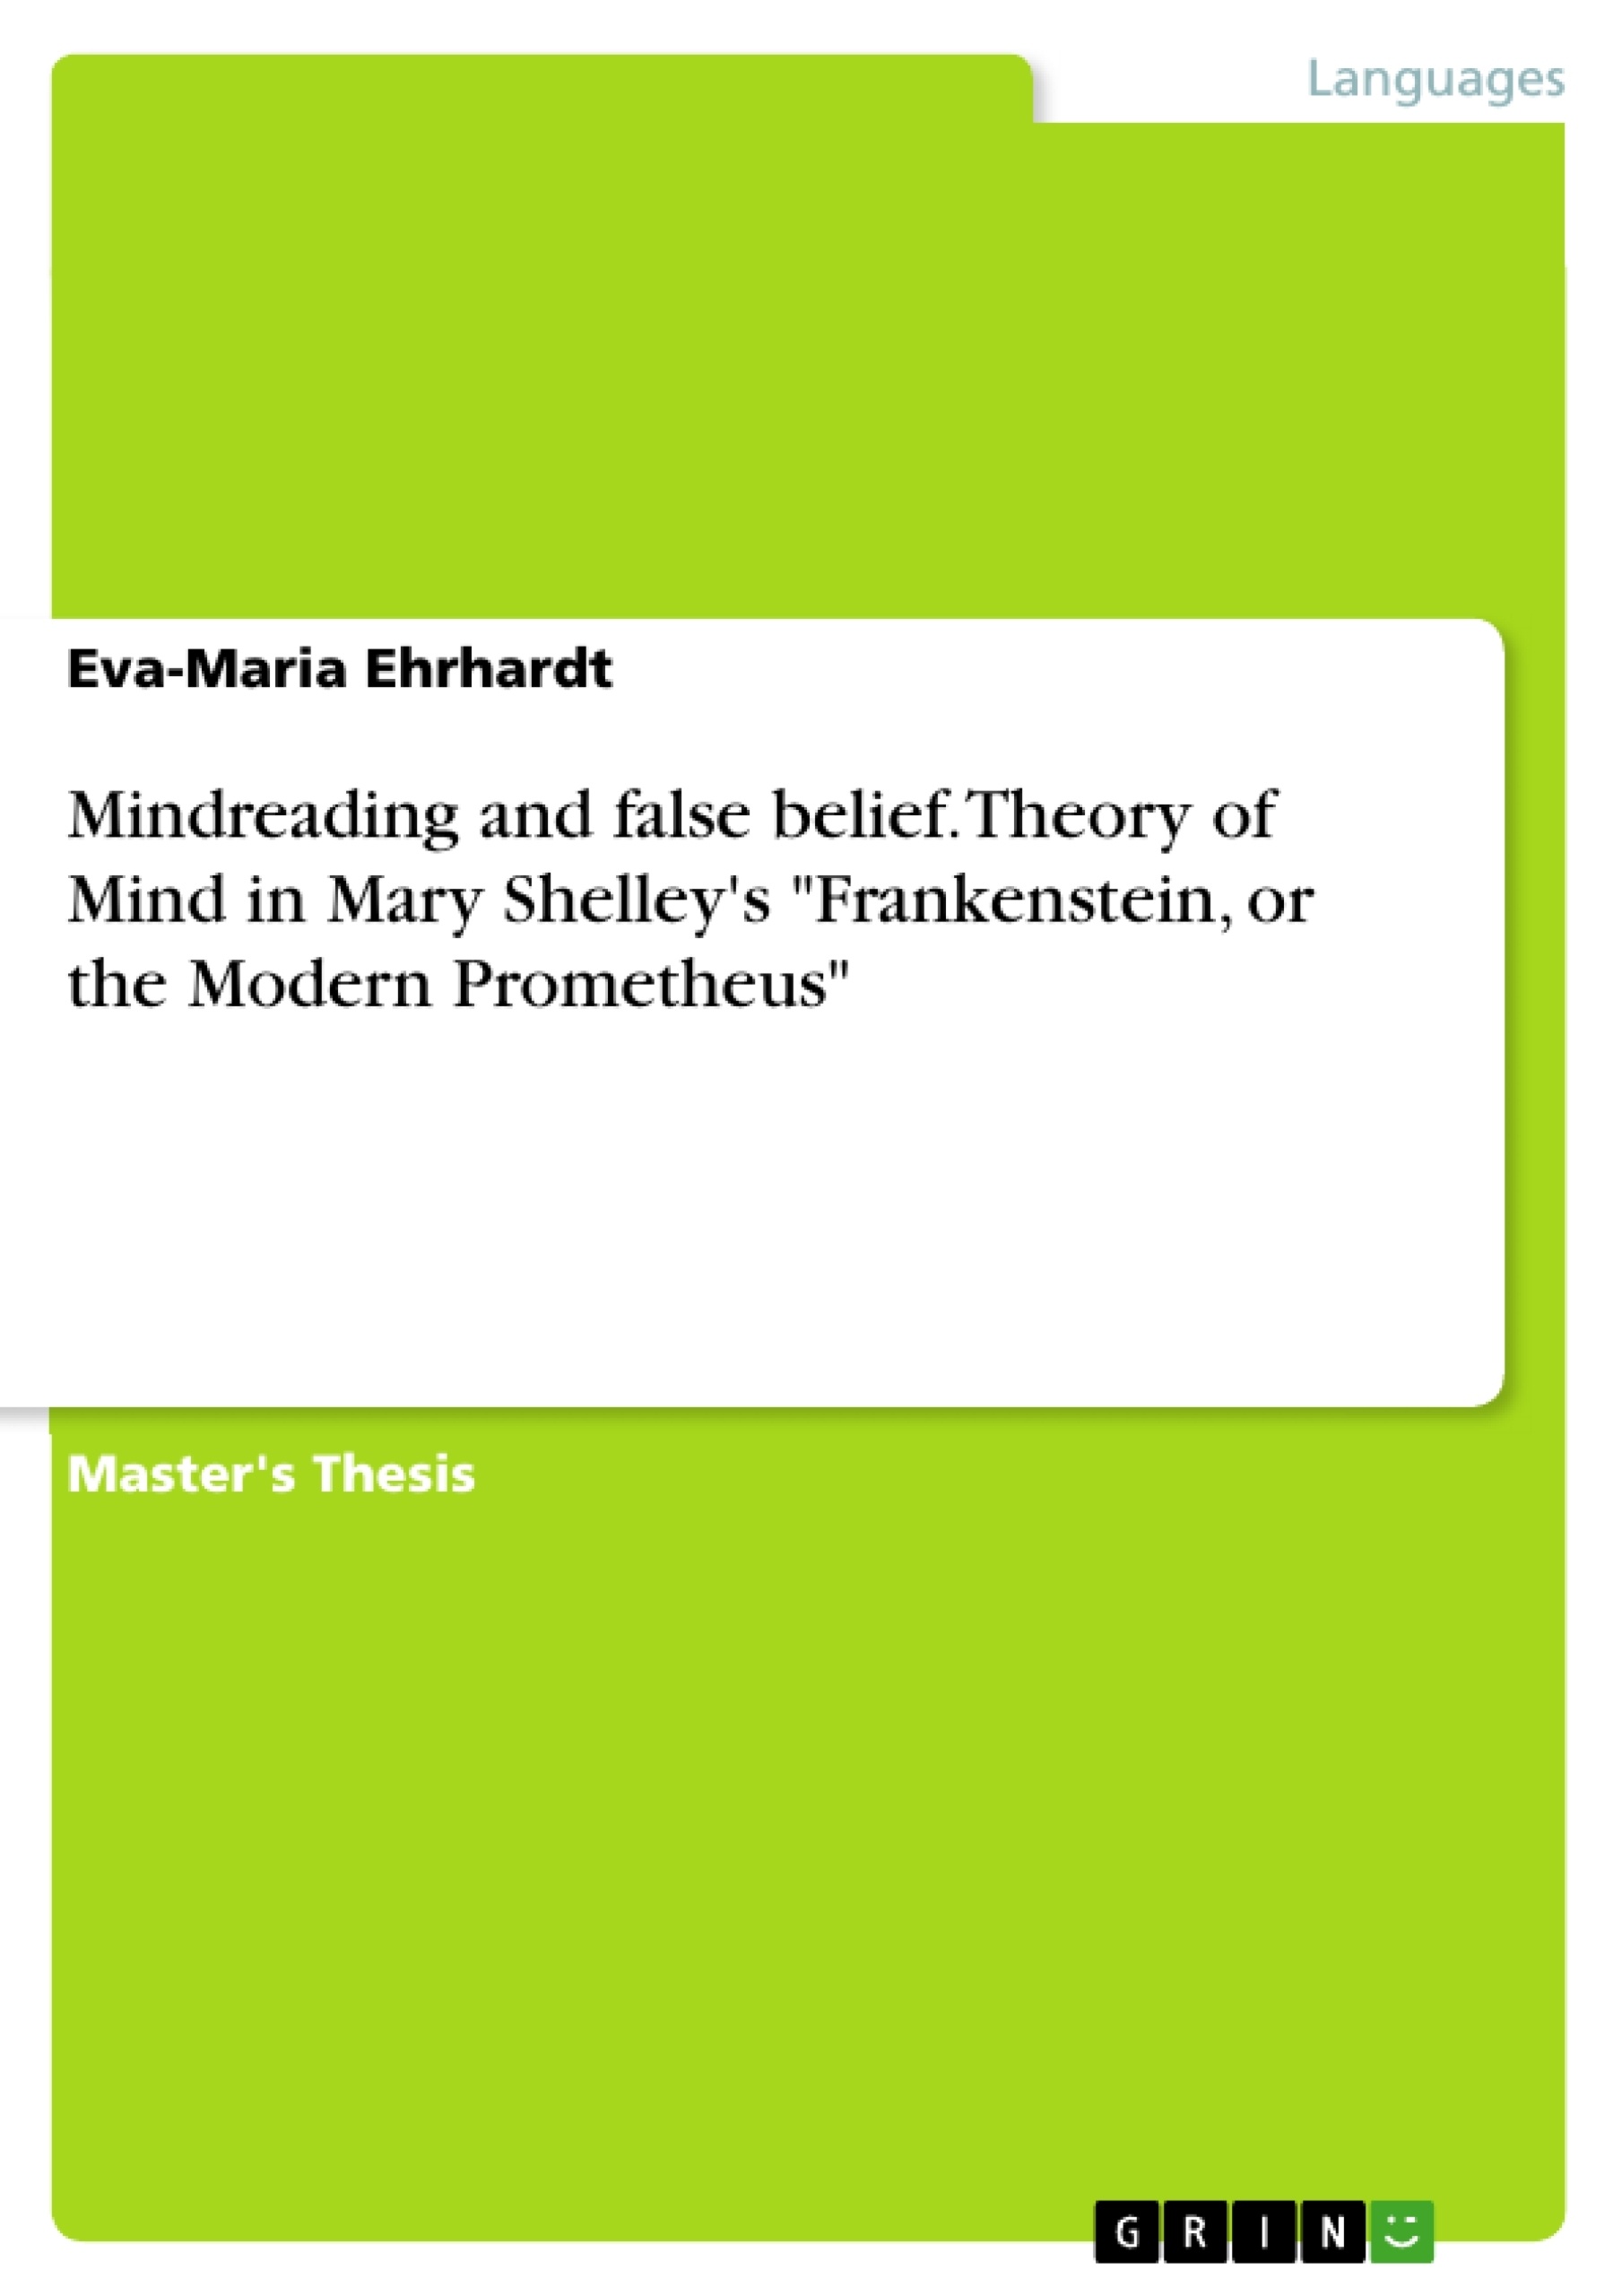 Titre: Mindreading and false belief. Theory of Mind in Mary Shelley's "Frankenstein, or the Modern Prometheus"